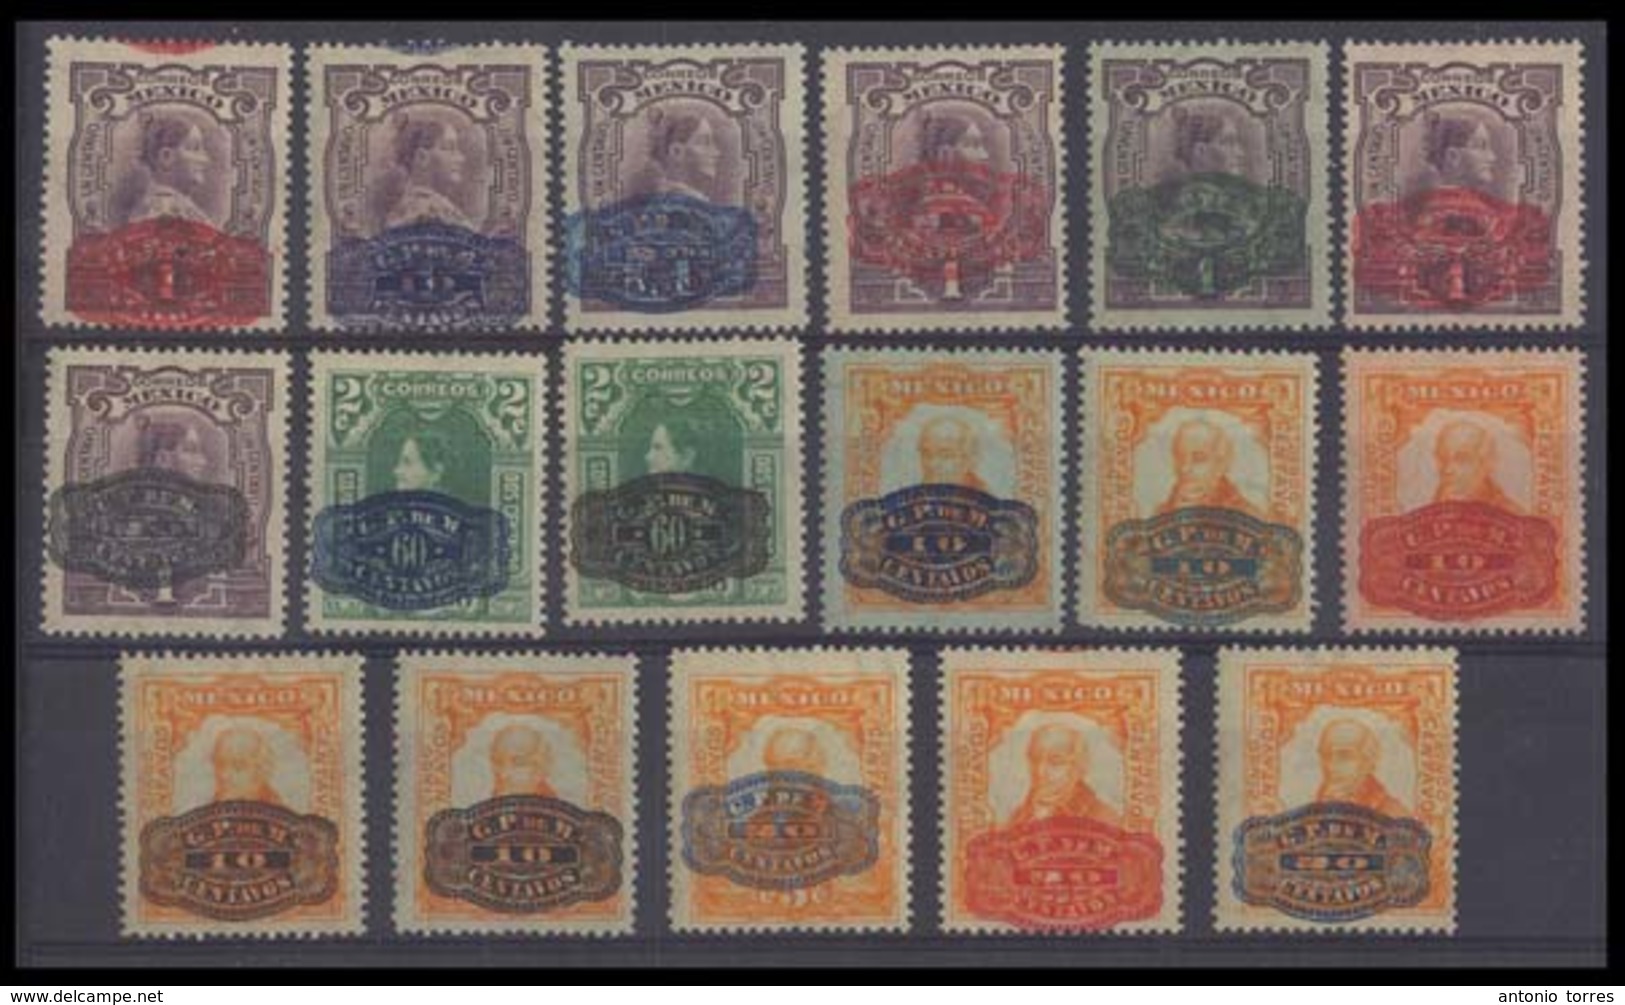 Mexico - XX. 1916. Barrilito Issue. Selection Of 17 Diff Overprinted ESSAY In Diff Colors, Full O.G. Light Hinge. Exceed - Messico